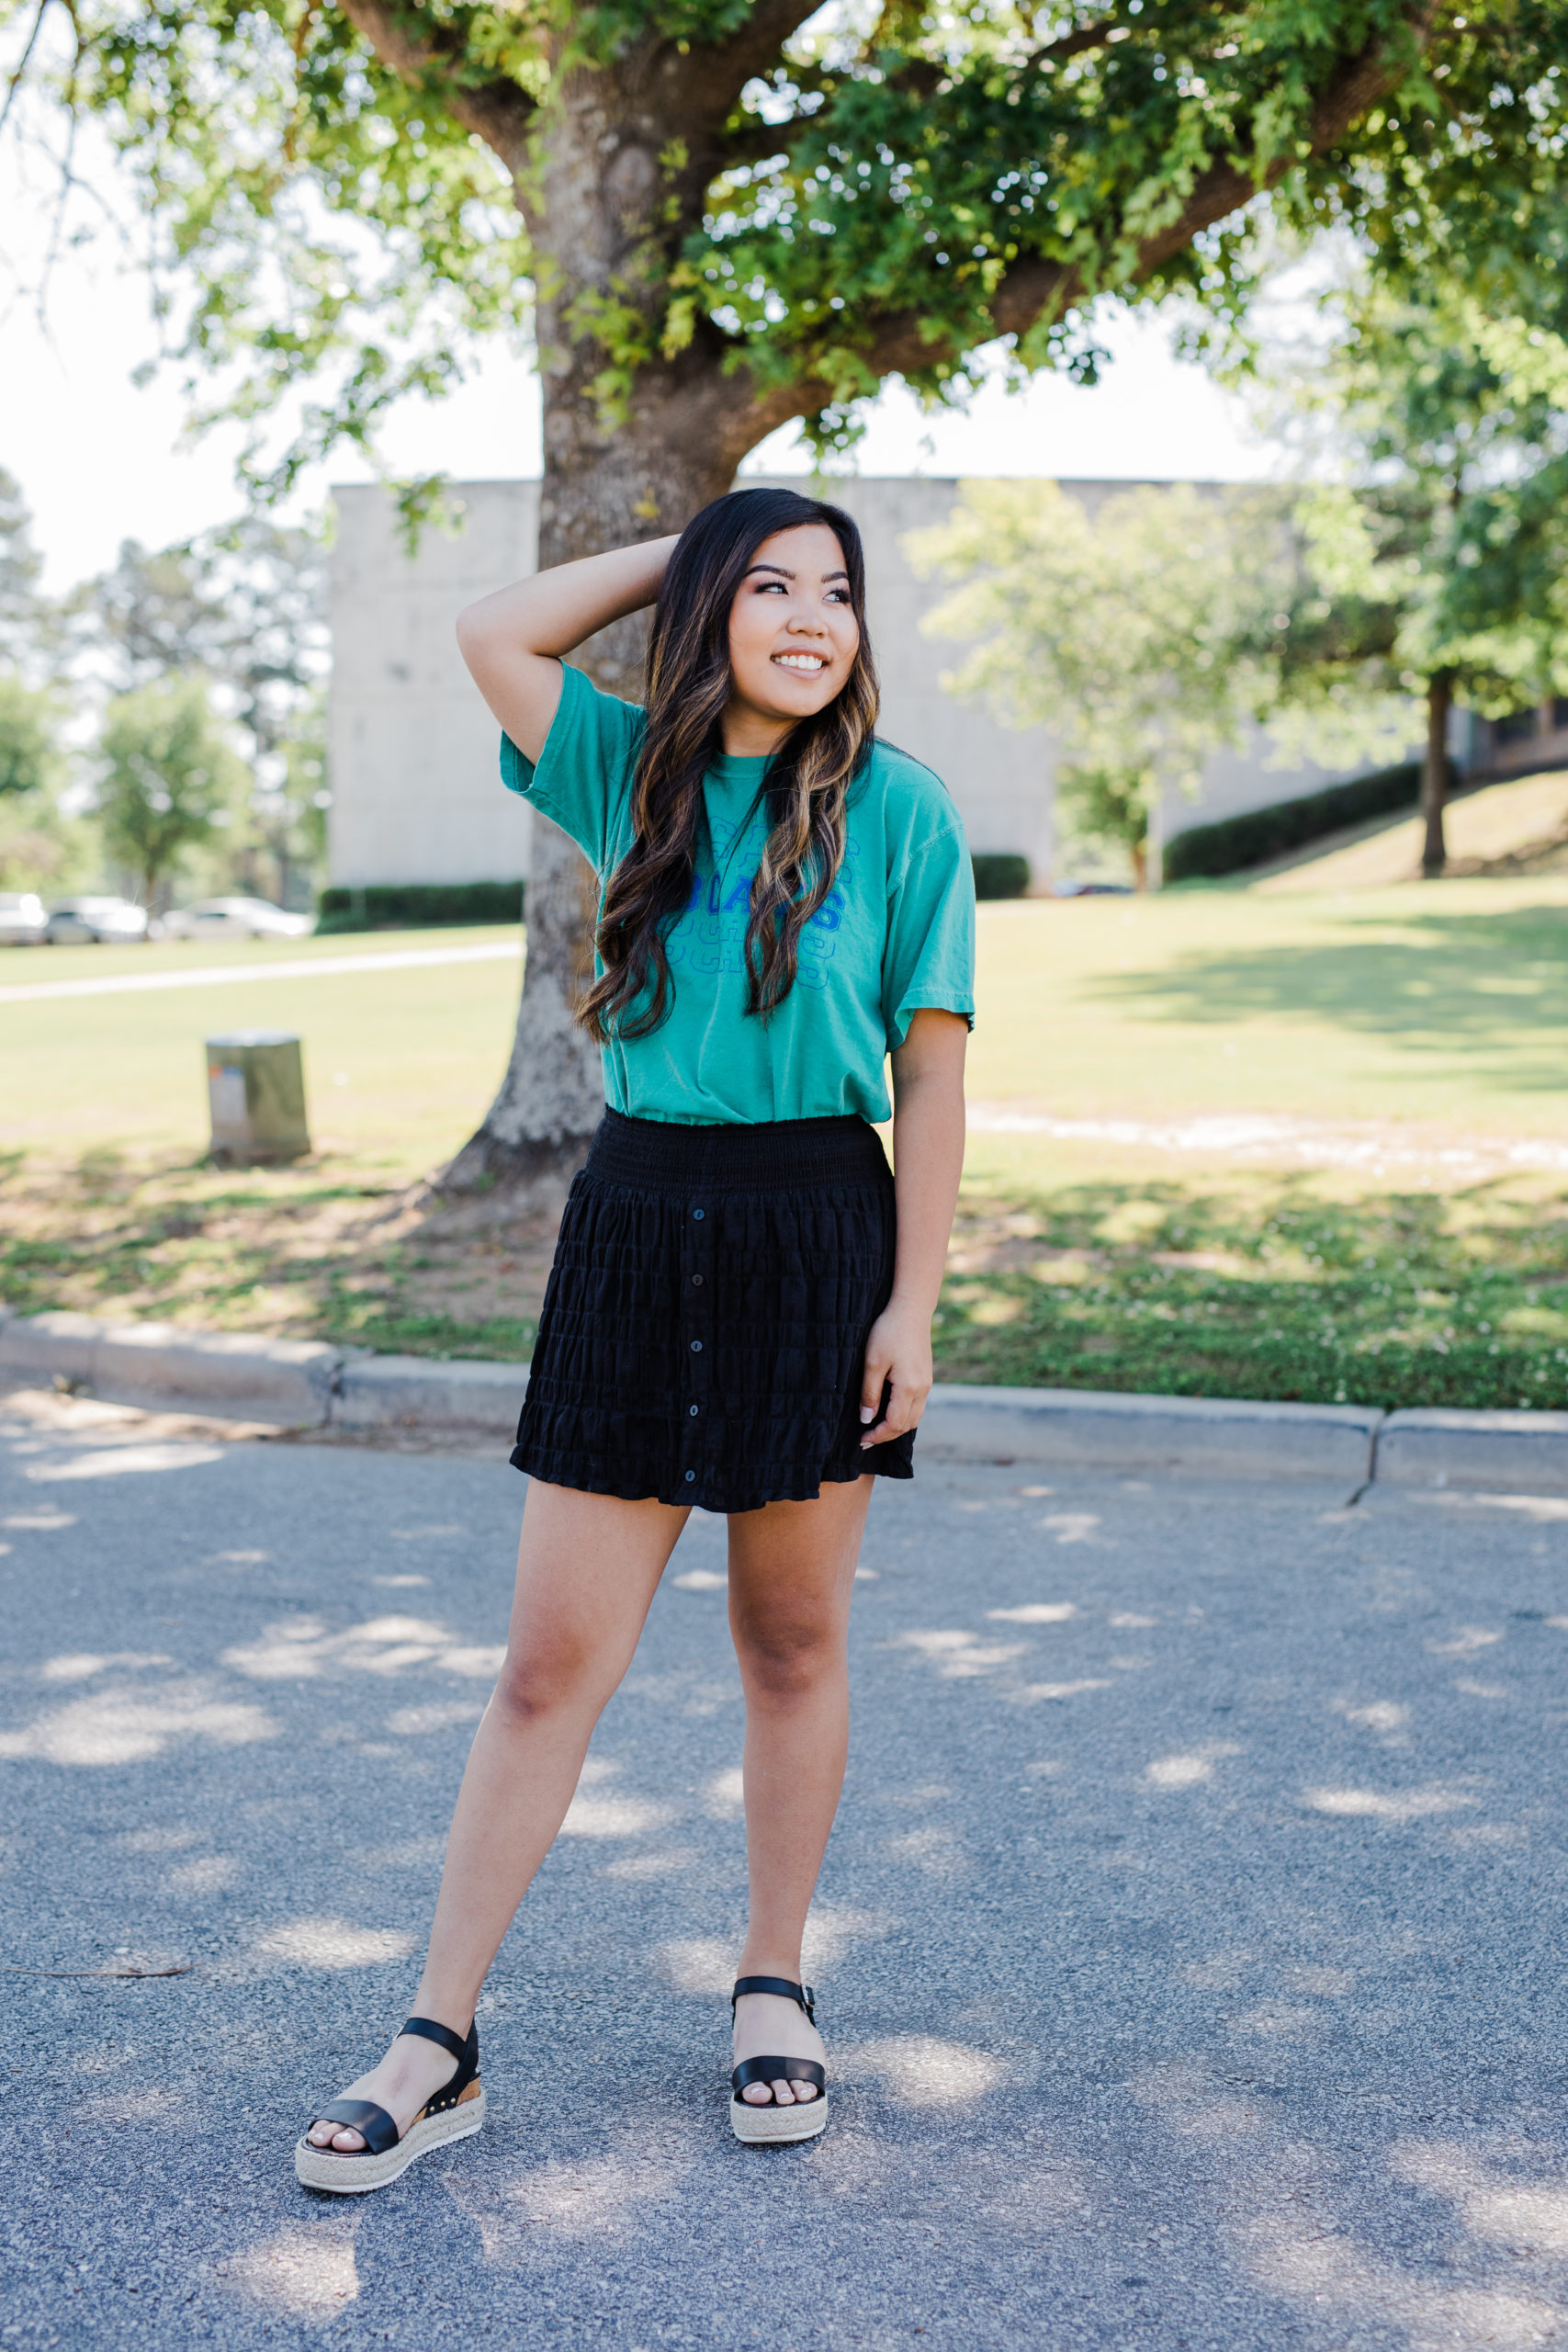 senior photo Augusta photographer captures senior girl posing outside of her school in a garden as she wears a green top and black skirt